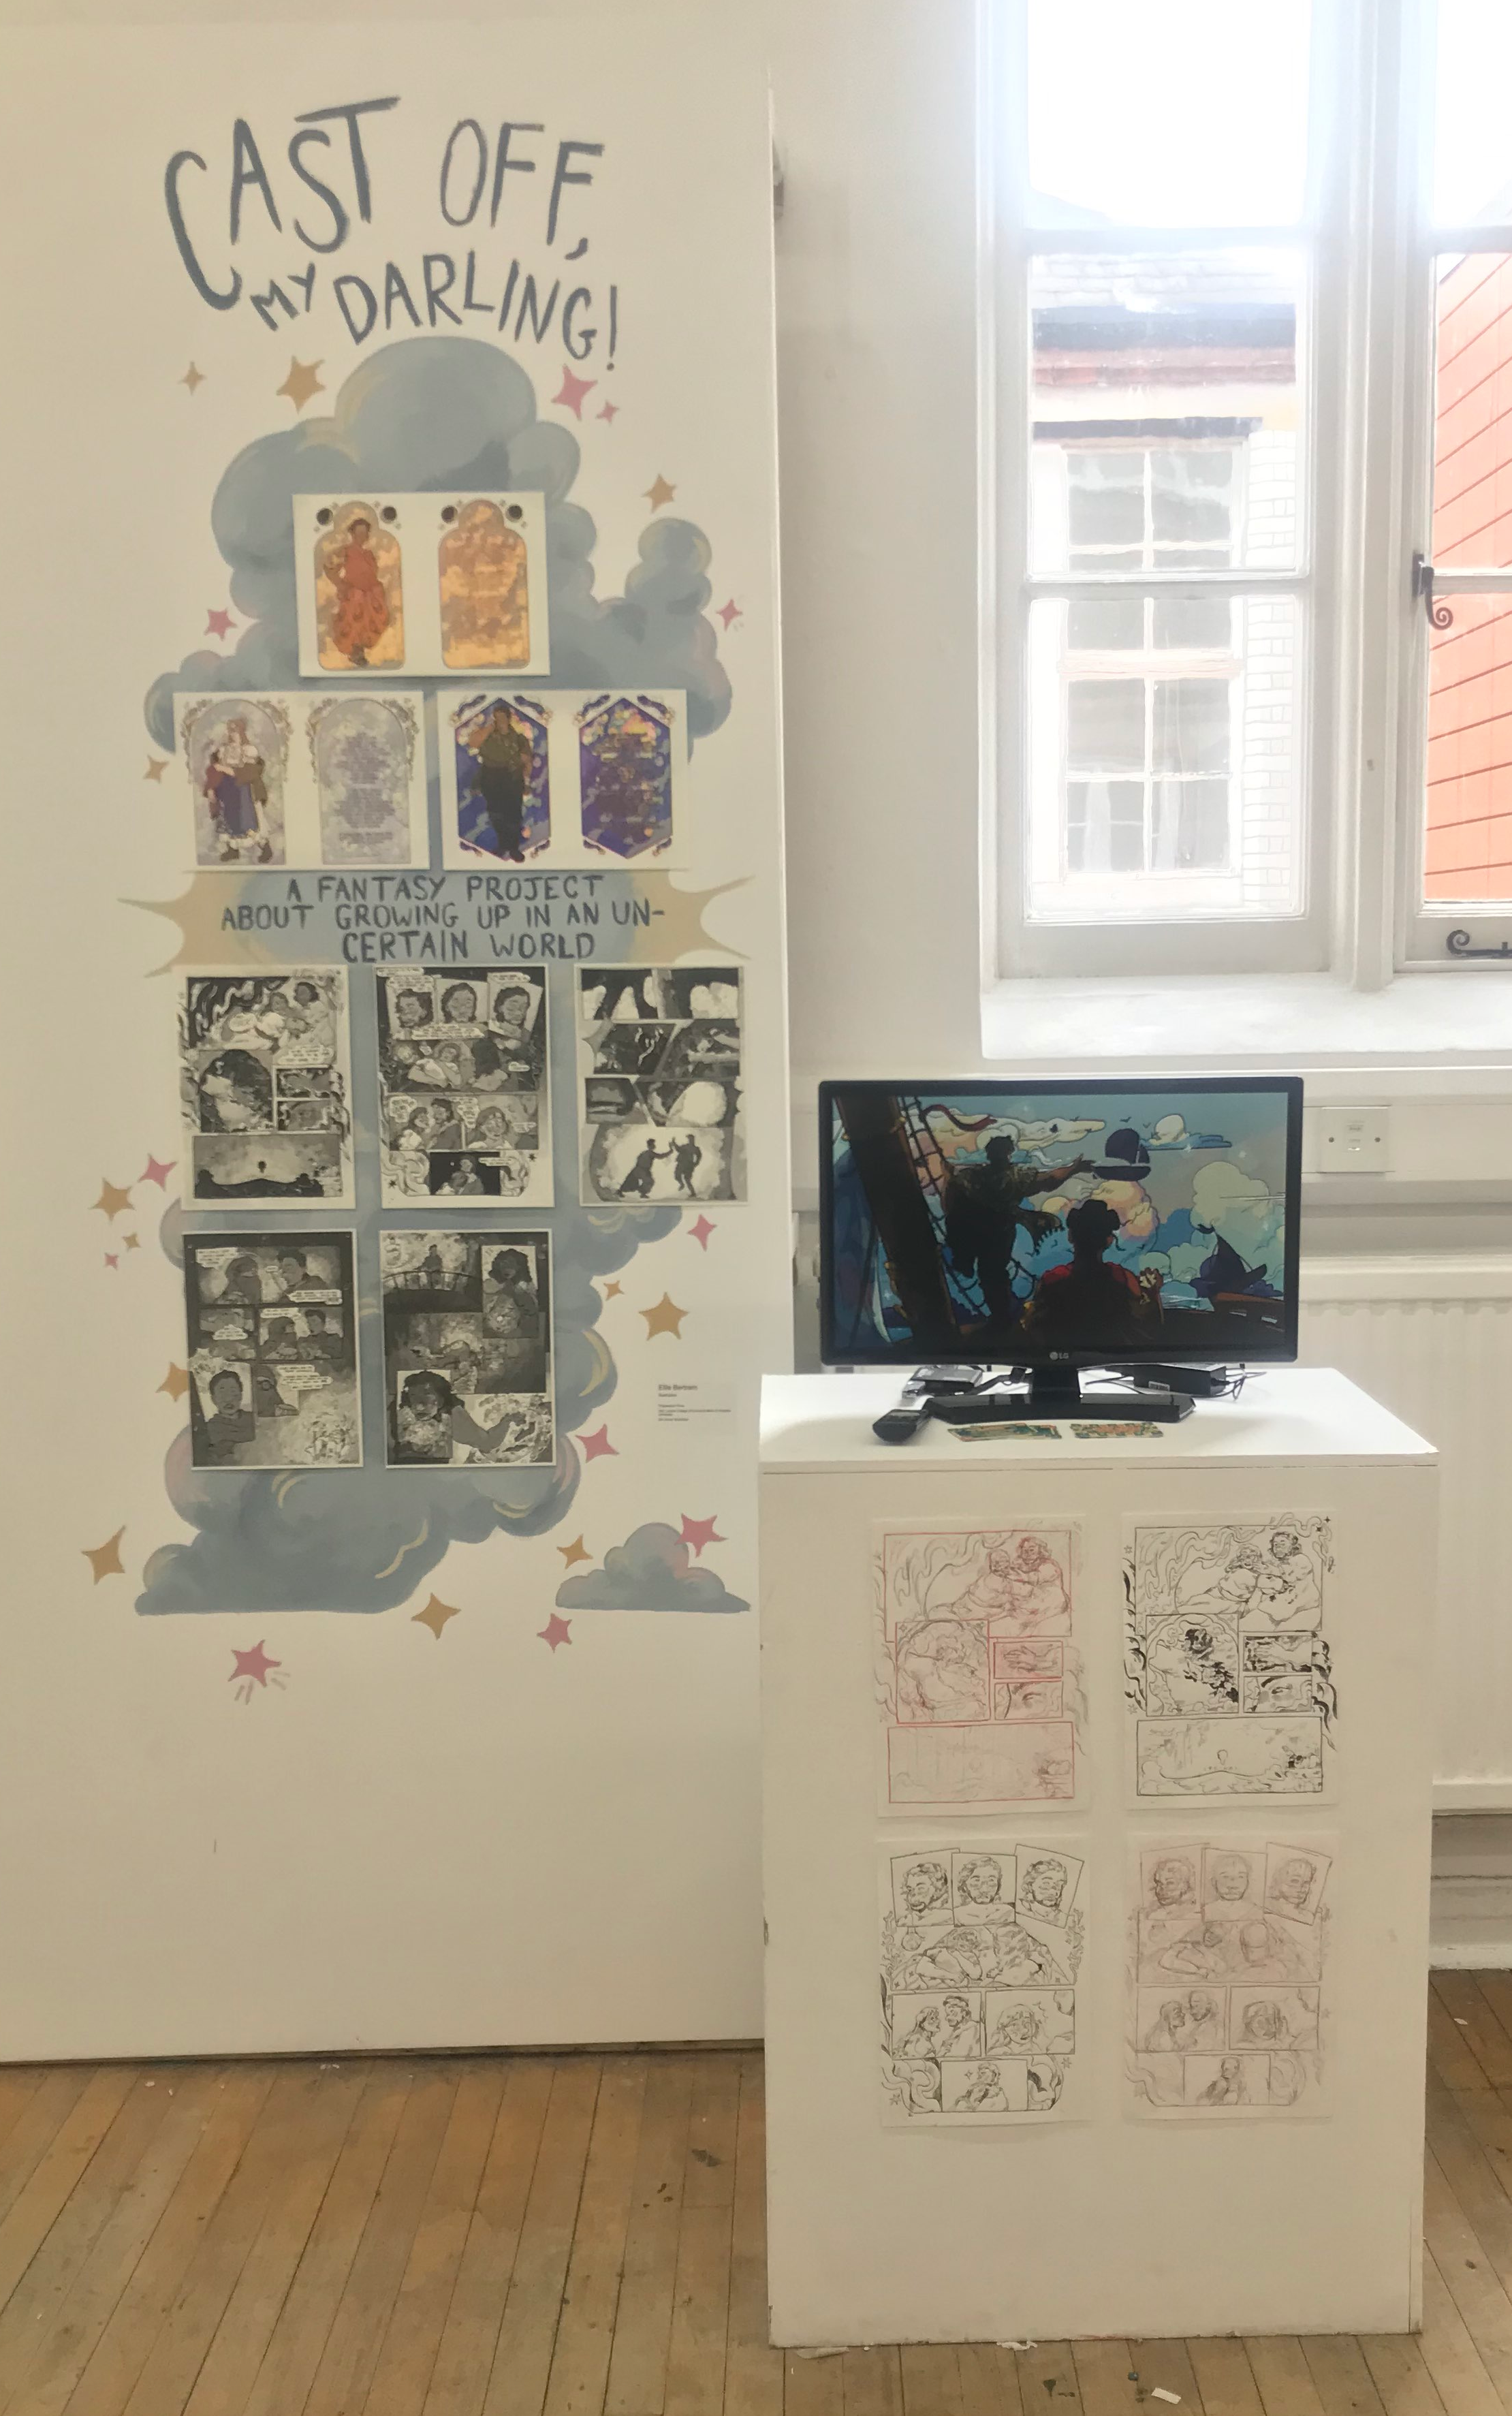 A display of artwork in a show. There are multiple full-colour and black and white risoprints, as well as a tv screen on a plinth playing an animation, which multiple sketches are displayed on the front side of.